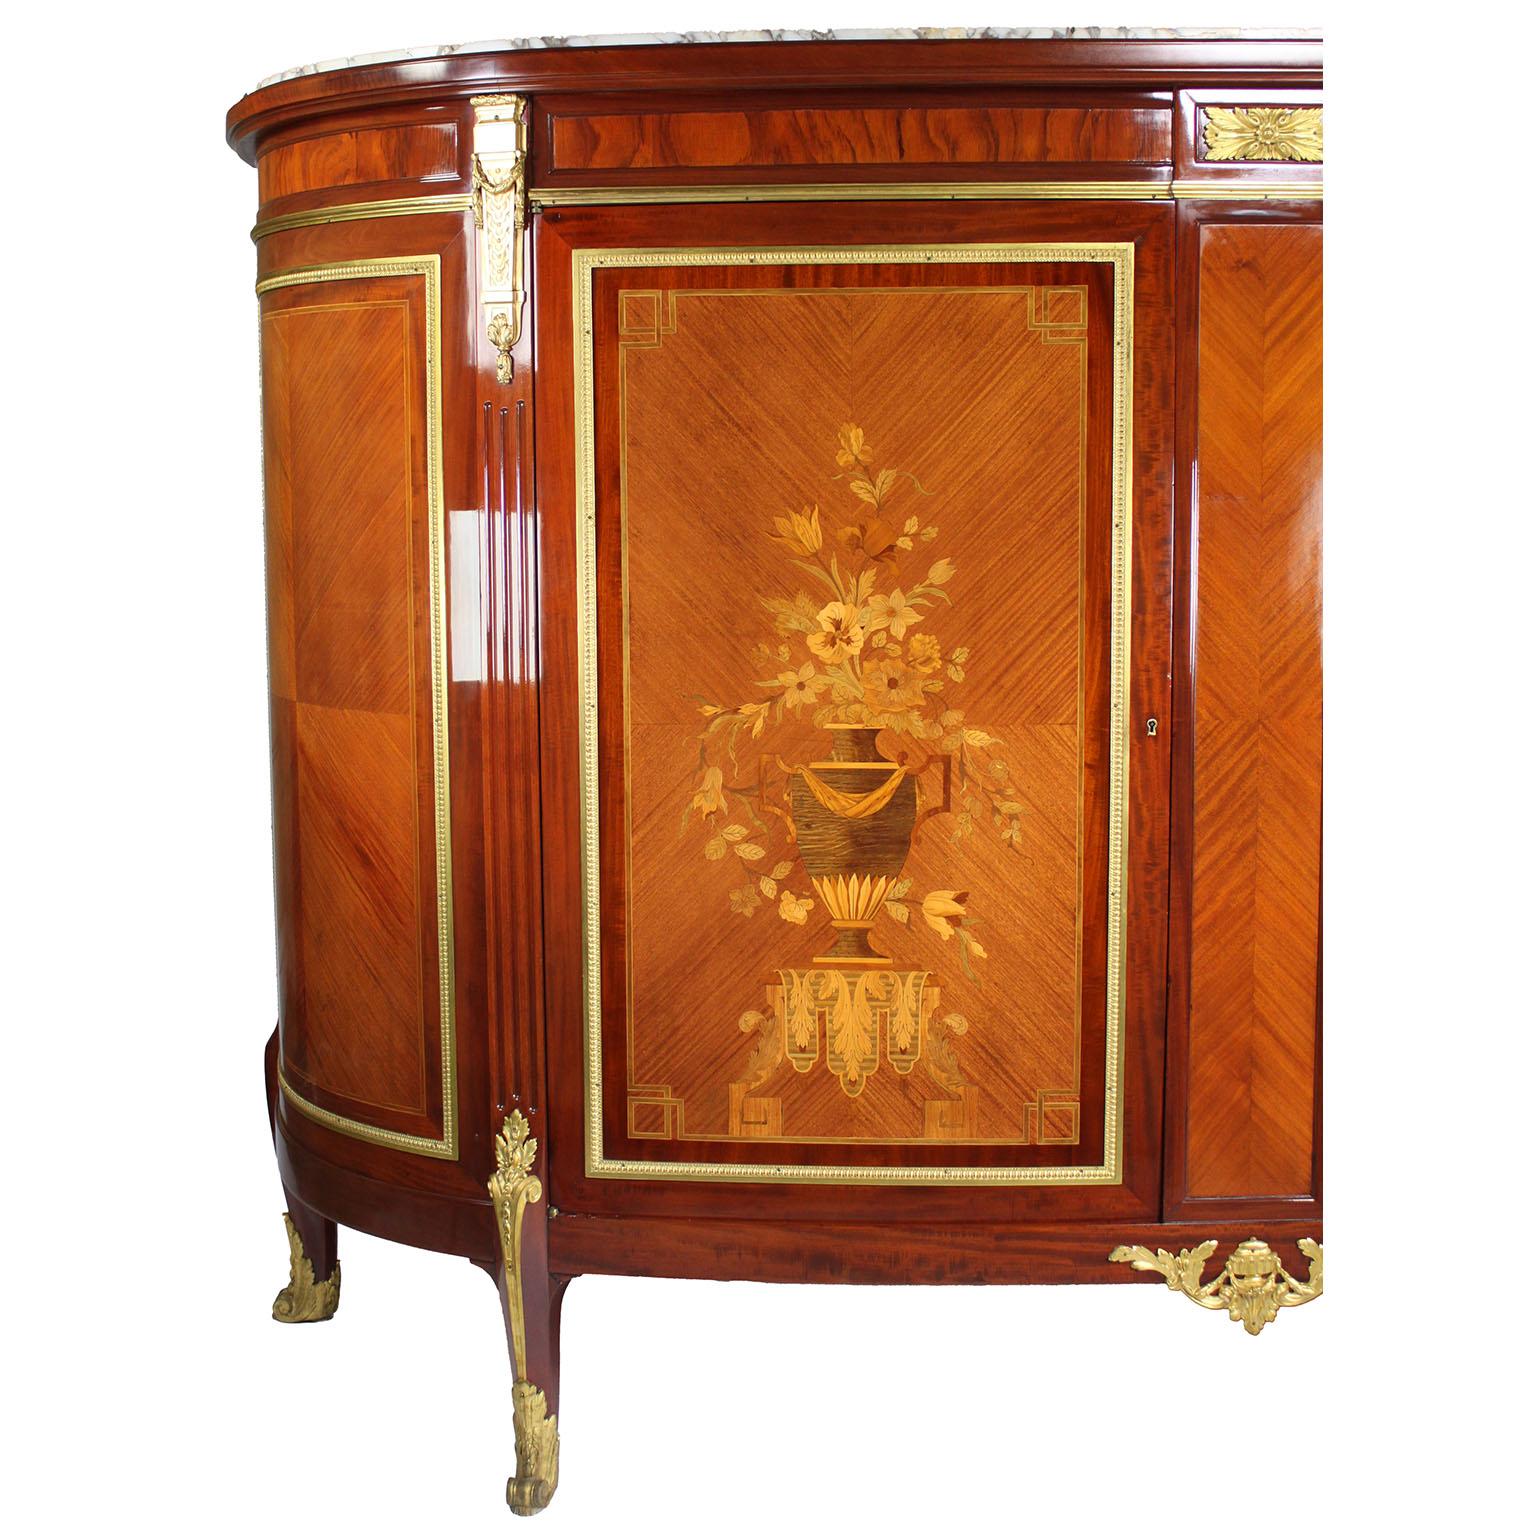 A Fine French 19th-20th Century Louis XV Style Mahogany, Satinwood and Tulipwood Marquetry Gilt-Bronze Mounted Two-Door Buffet Server China Cabinet with marble top. The slender and tall twin-door cabinet with rounded sides, ormolu trim-mounts with